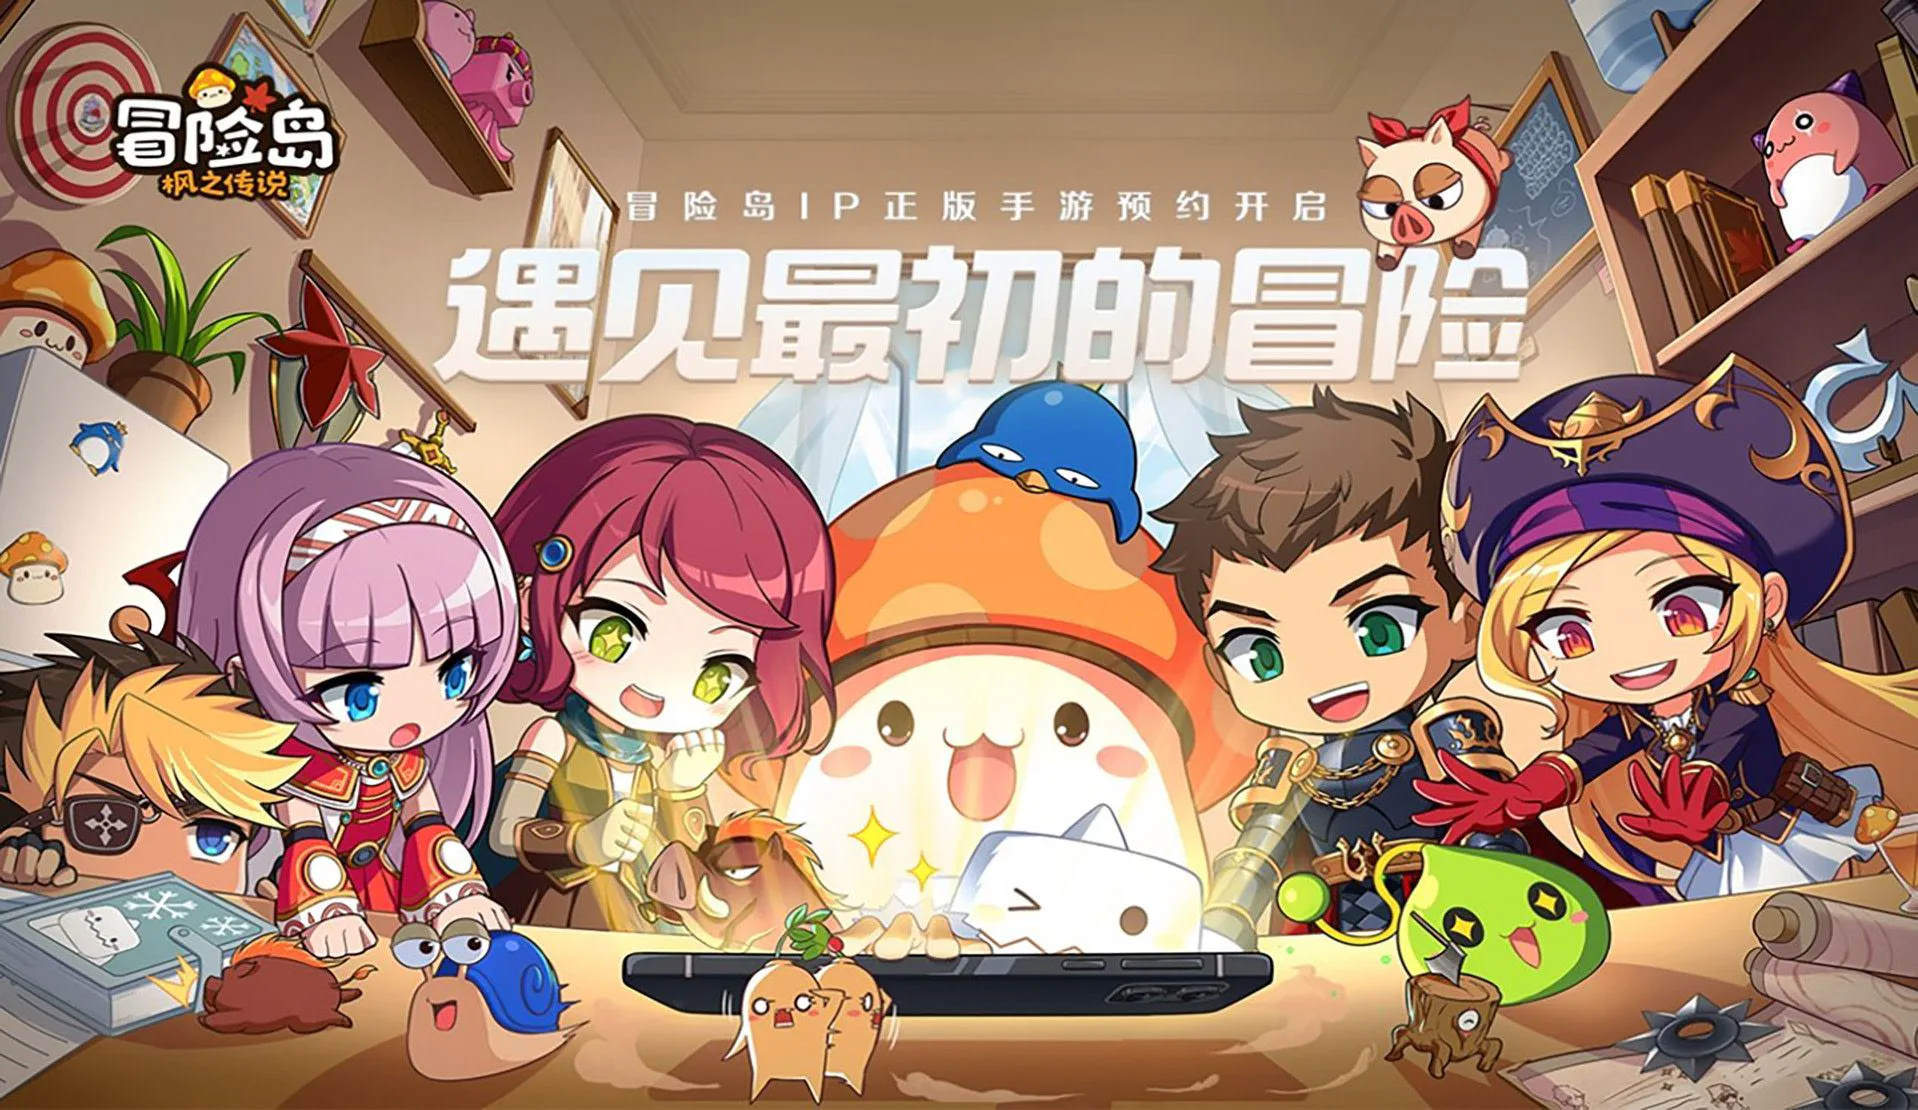 MapleStory Players Deceived for a Decade: Nexon Fined $9 Million for Unfair Practices 7